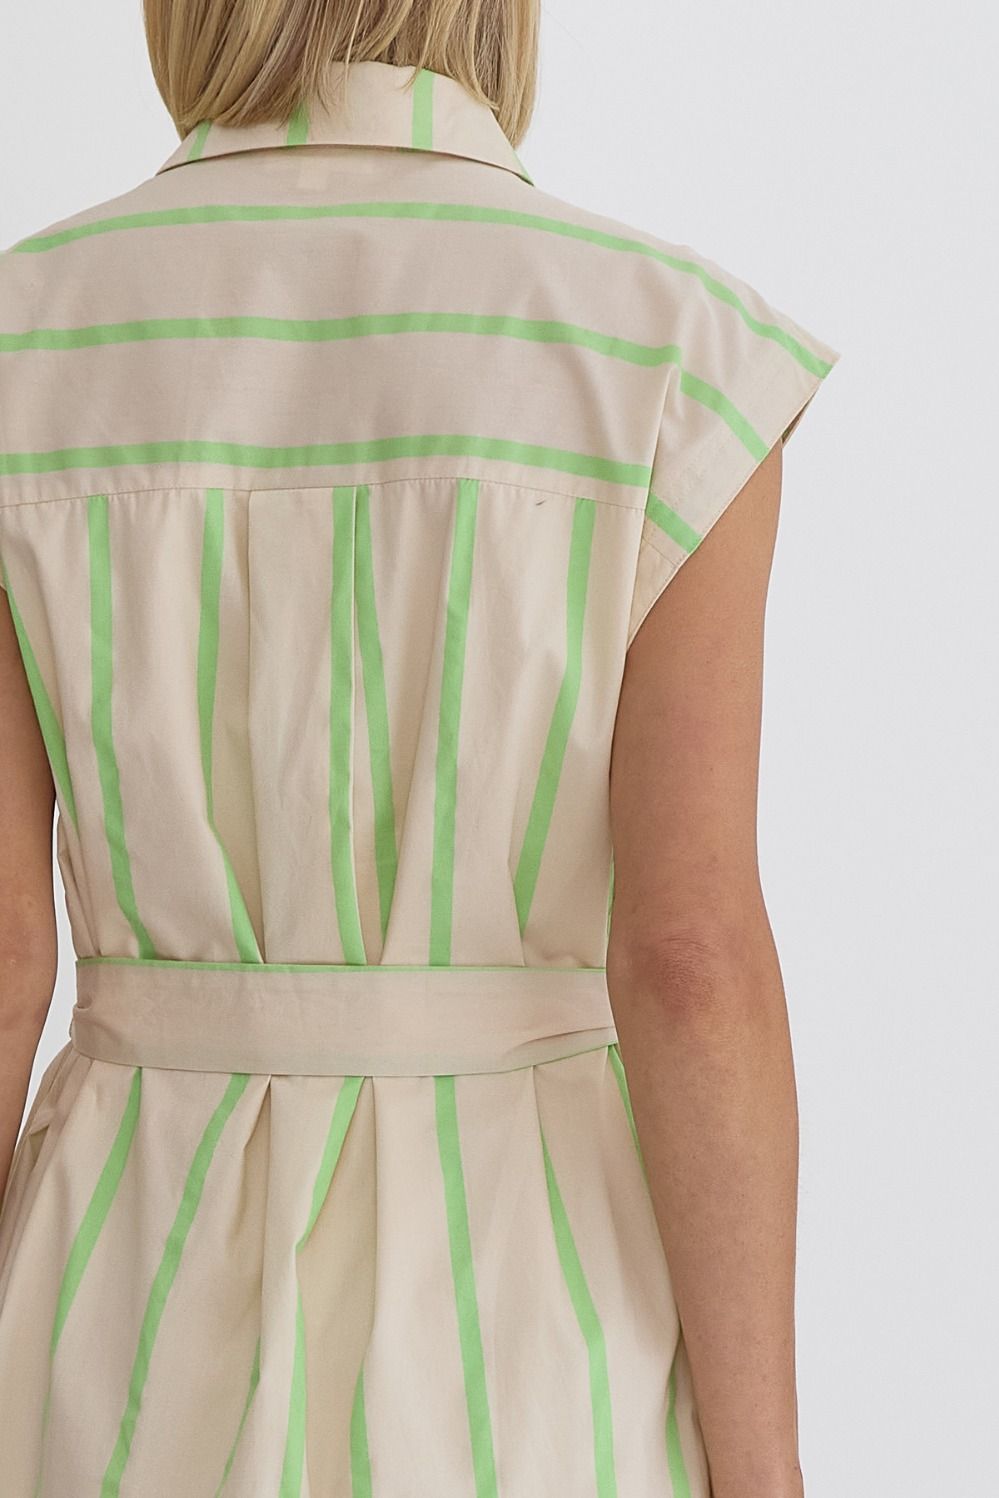 striped sleevless button up midi dress in lime-back detail